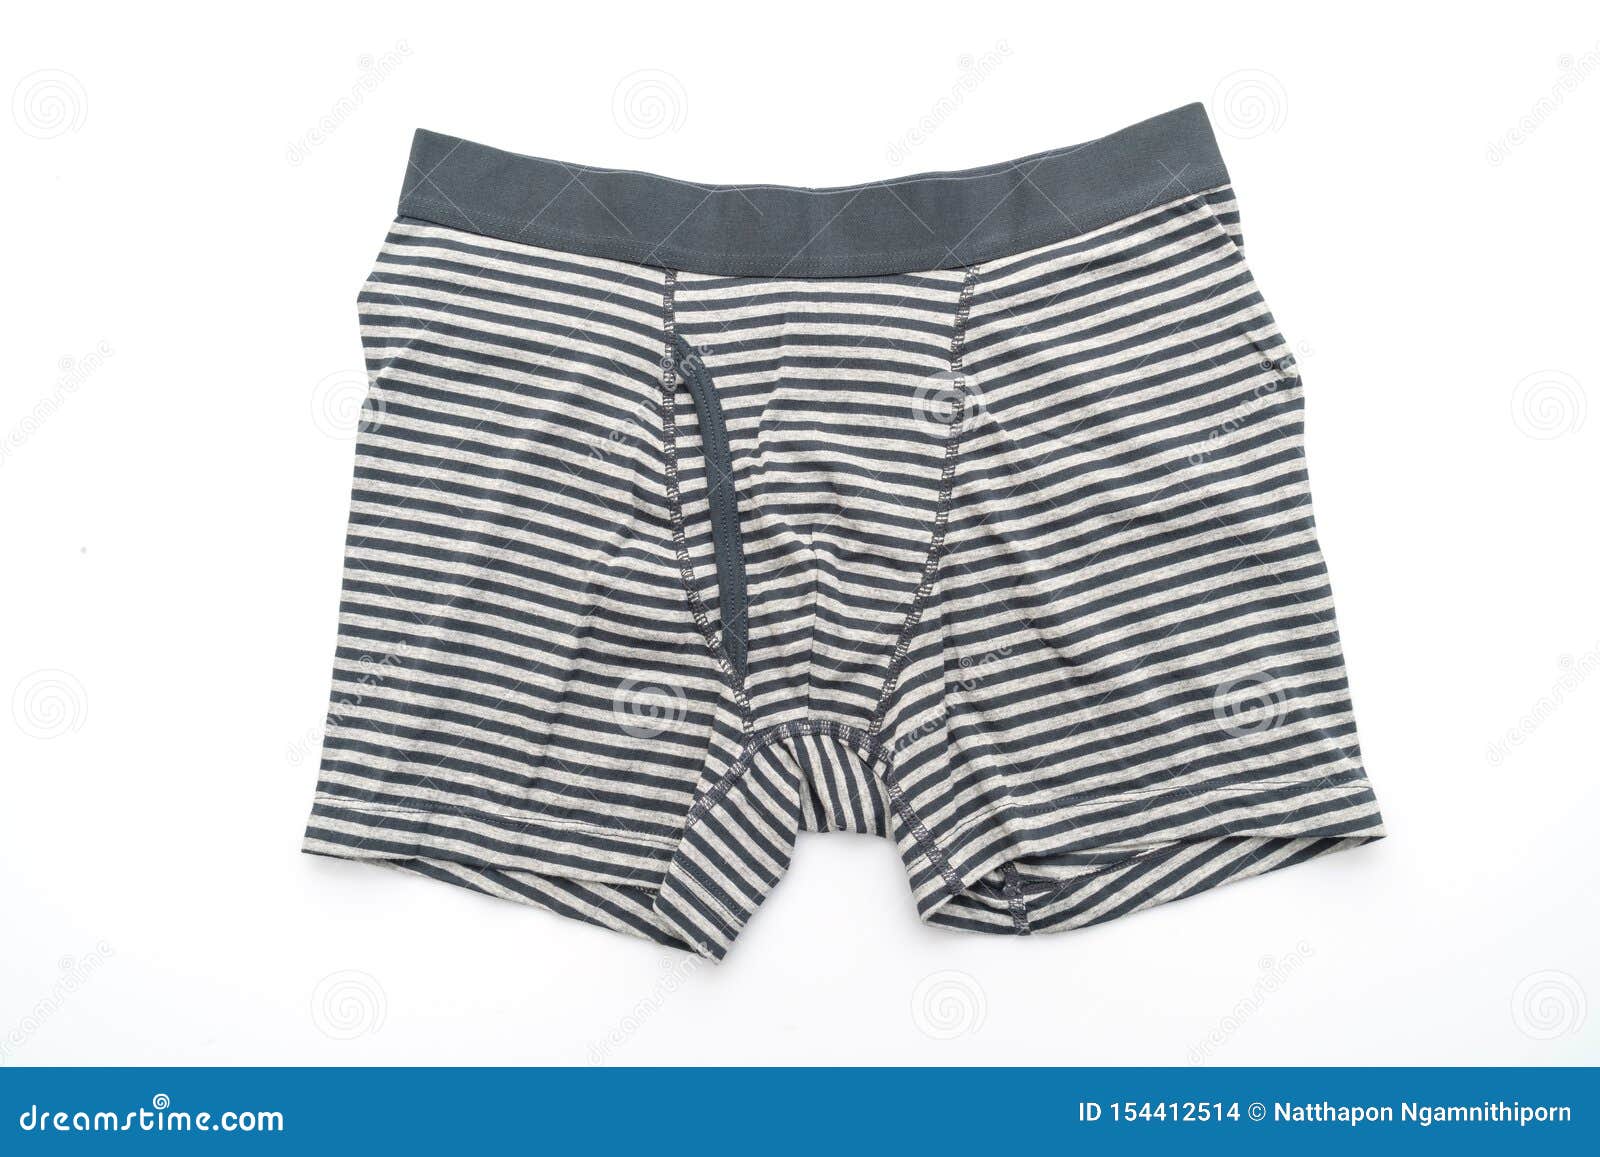 Striped men underwear stock photo. Image of clothes - 154412514